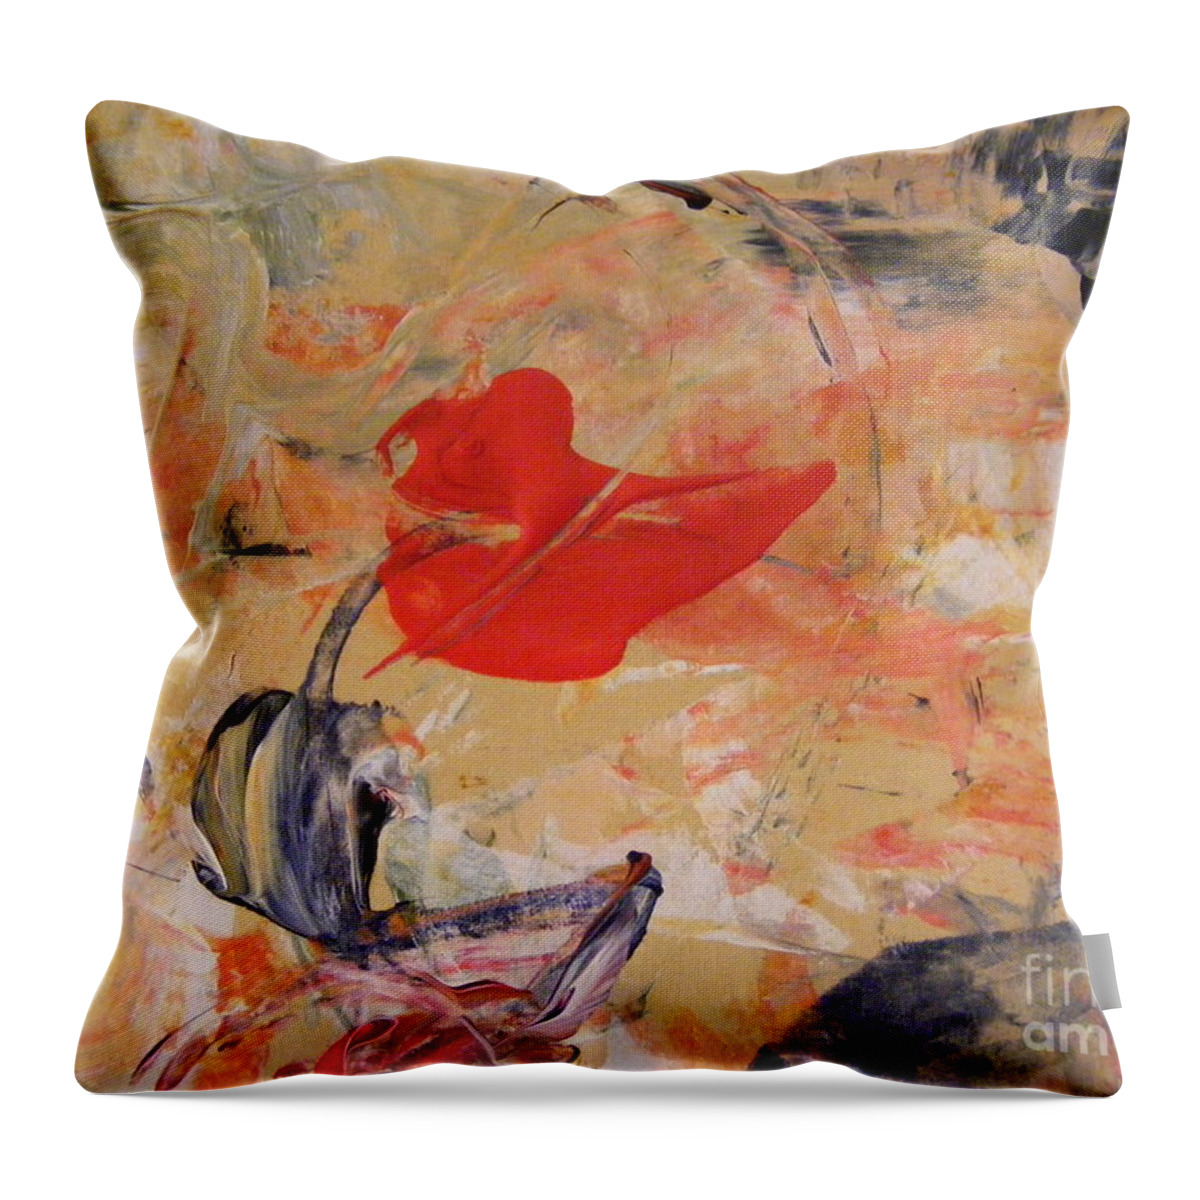 Acrylic Painting Throw Pillow featuring the painting Red by Nancy Kane Chapman